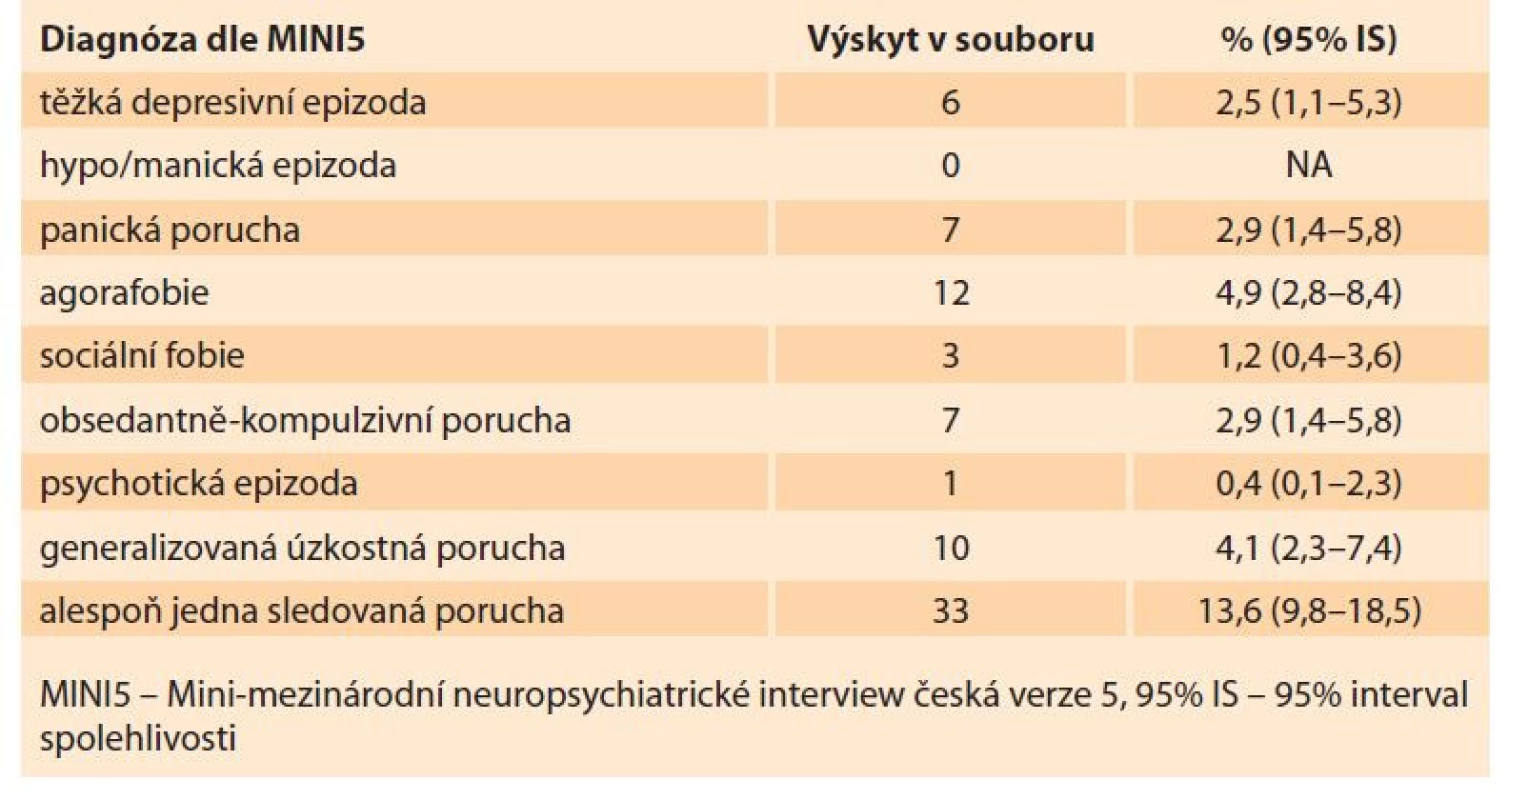 Výsledky MINI5 interview v celém souboru (n = 243).<br>
Tab. 1. Results of MINI5 interview in the whole group (N = 243).